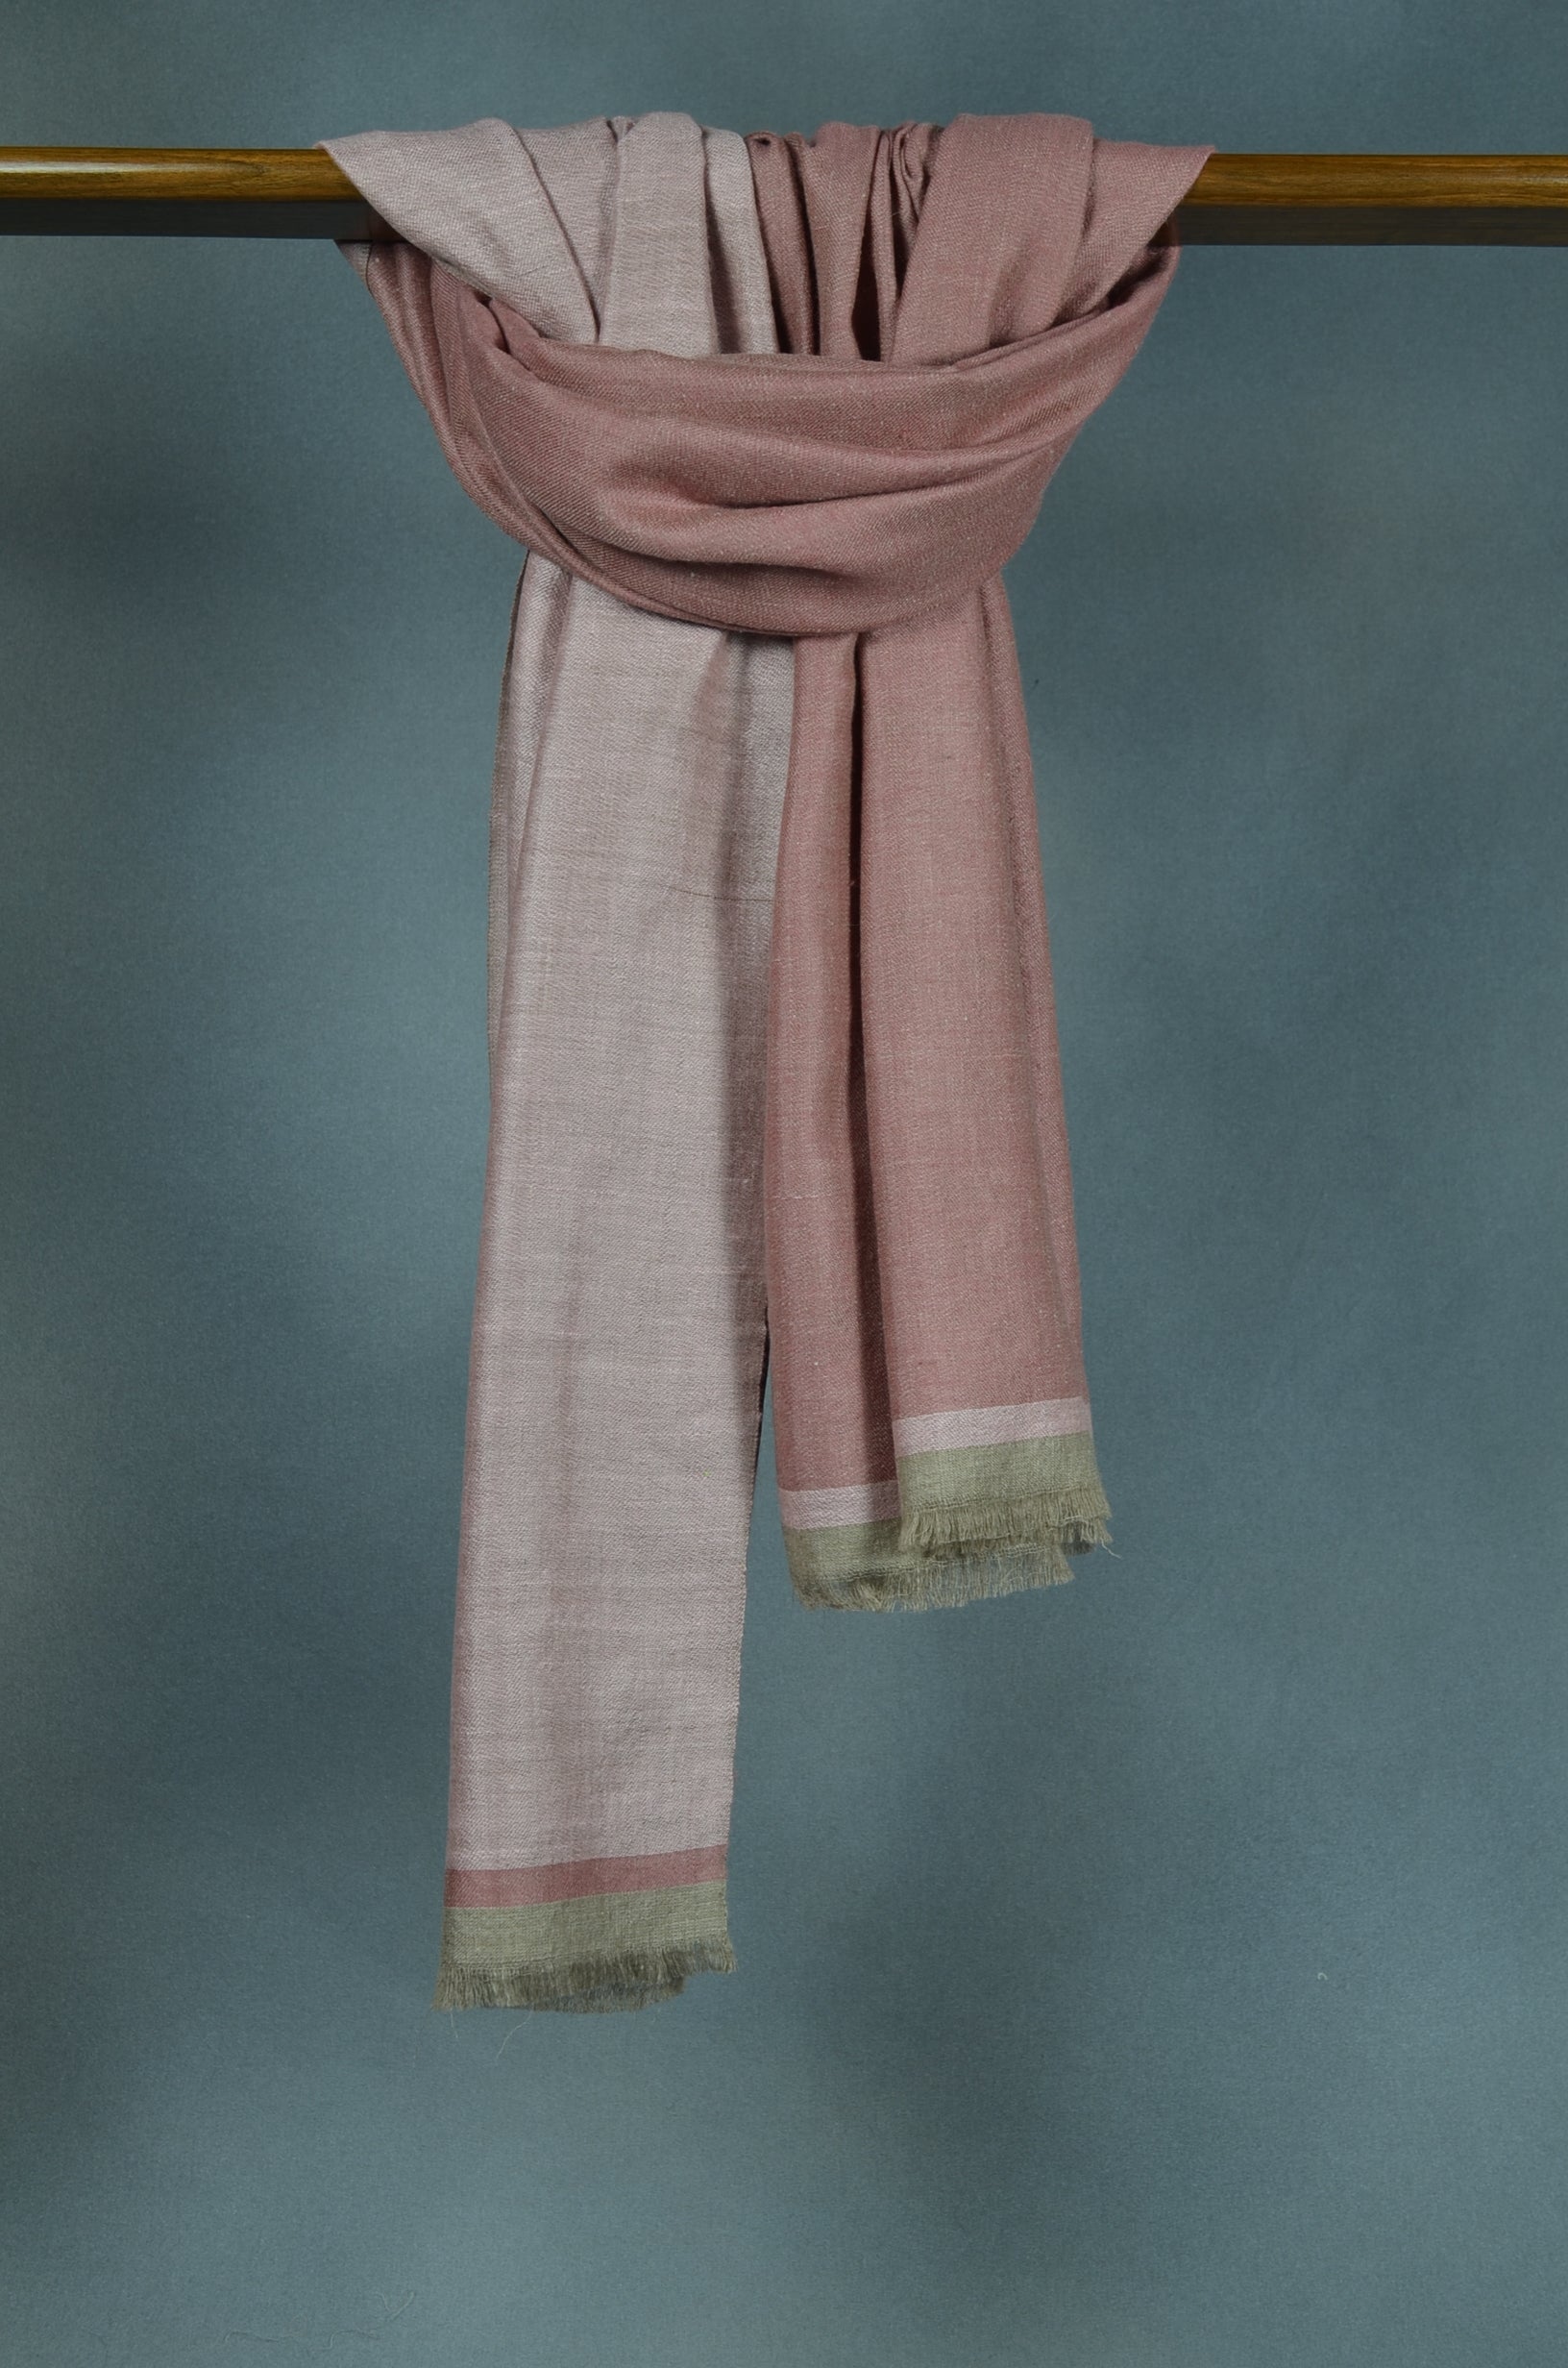 Reversible Amber and Light Pink Handwoven Cashmere Pashmina Shawl